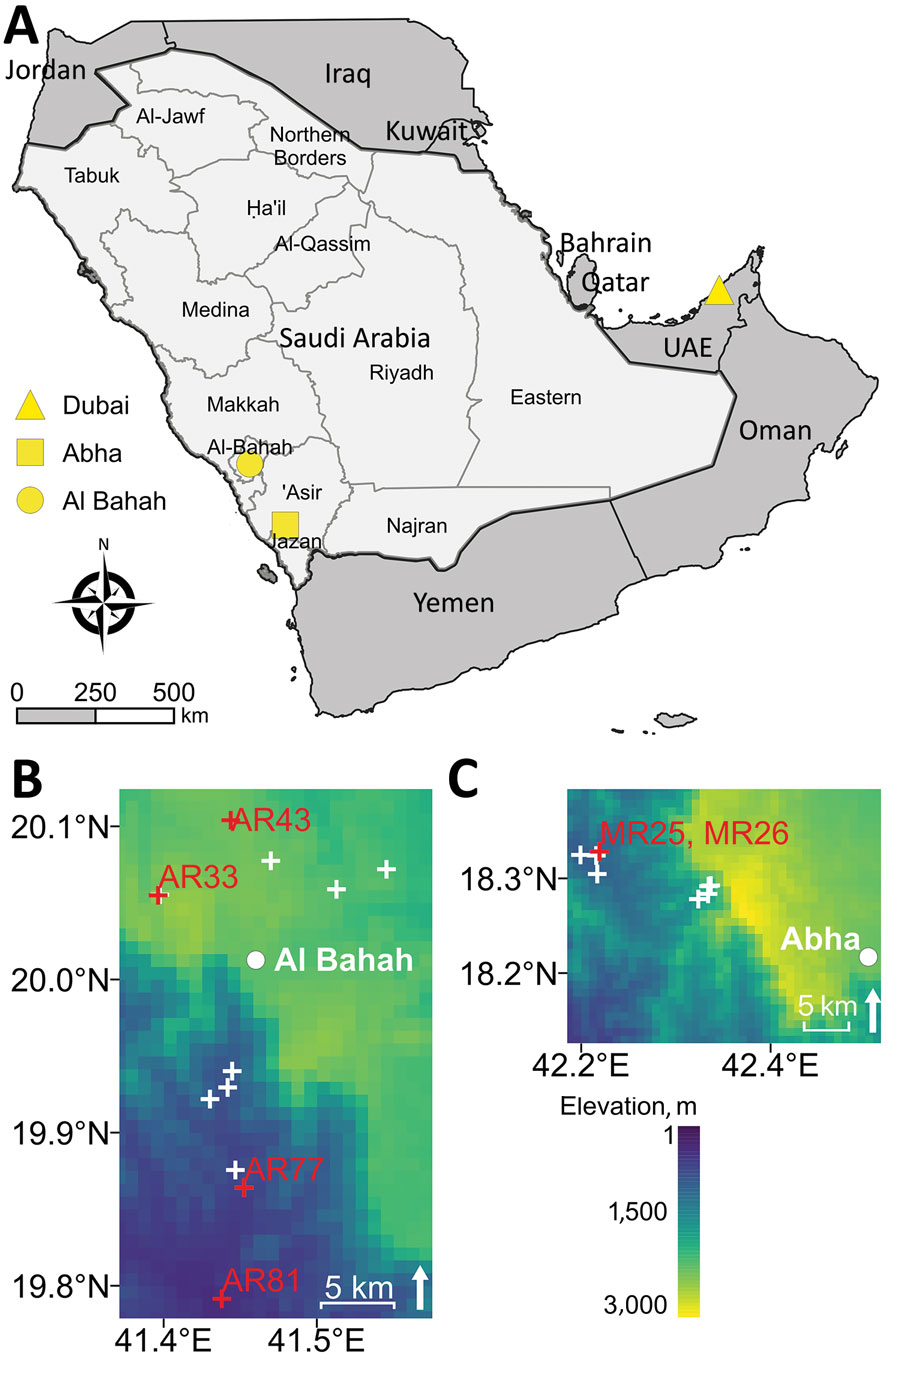 Sampling sites and elevation from which rodents were collected for molecular detection of Candidatus Orientia chuto in wildlife, Saudi Arabia. A) Study region on the Arabian Peninsula, including Dubai (yellow triangle), where a clinical case of scrub typhus caused by Candidatus O. chuto was reported in a previous study (5). Light gray area indicates Saudi Arabia; dark gray area indicates bordering countries on the Arabian Peninsula. Rodents were trapped in the Hijaz Mountains and surrounding towns of Al-Bahah Province (yellow circle indicates Al-Bahah, the capital city) and in the Asir Mountains of Asir Province (yellow square indicates Abha, the capital city). B, C) Heat maps detailing elevation above sea level of trapping locations in Al-Bahah Province (B) and Asir Province (C). Red crosses and sample labels indicate where Orientia-positive rodents were found; white crosses indicate areas in which rodents showed no evidence of infection. UAE, United Arab Emirates.